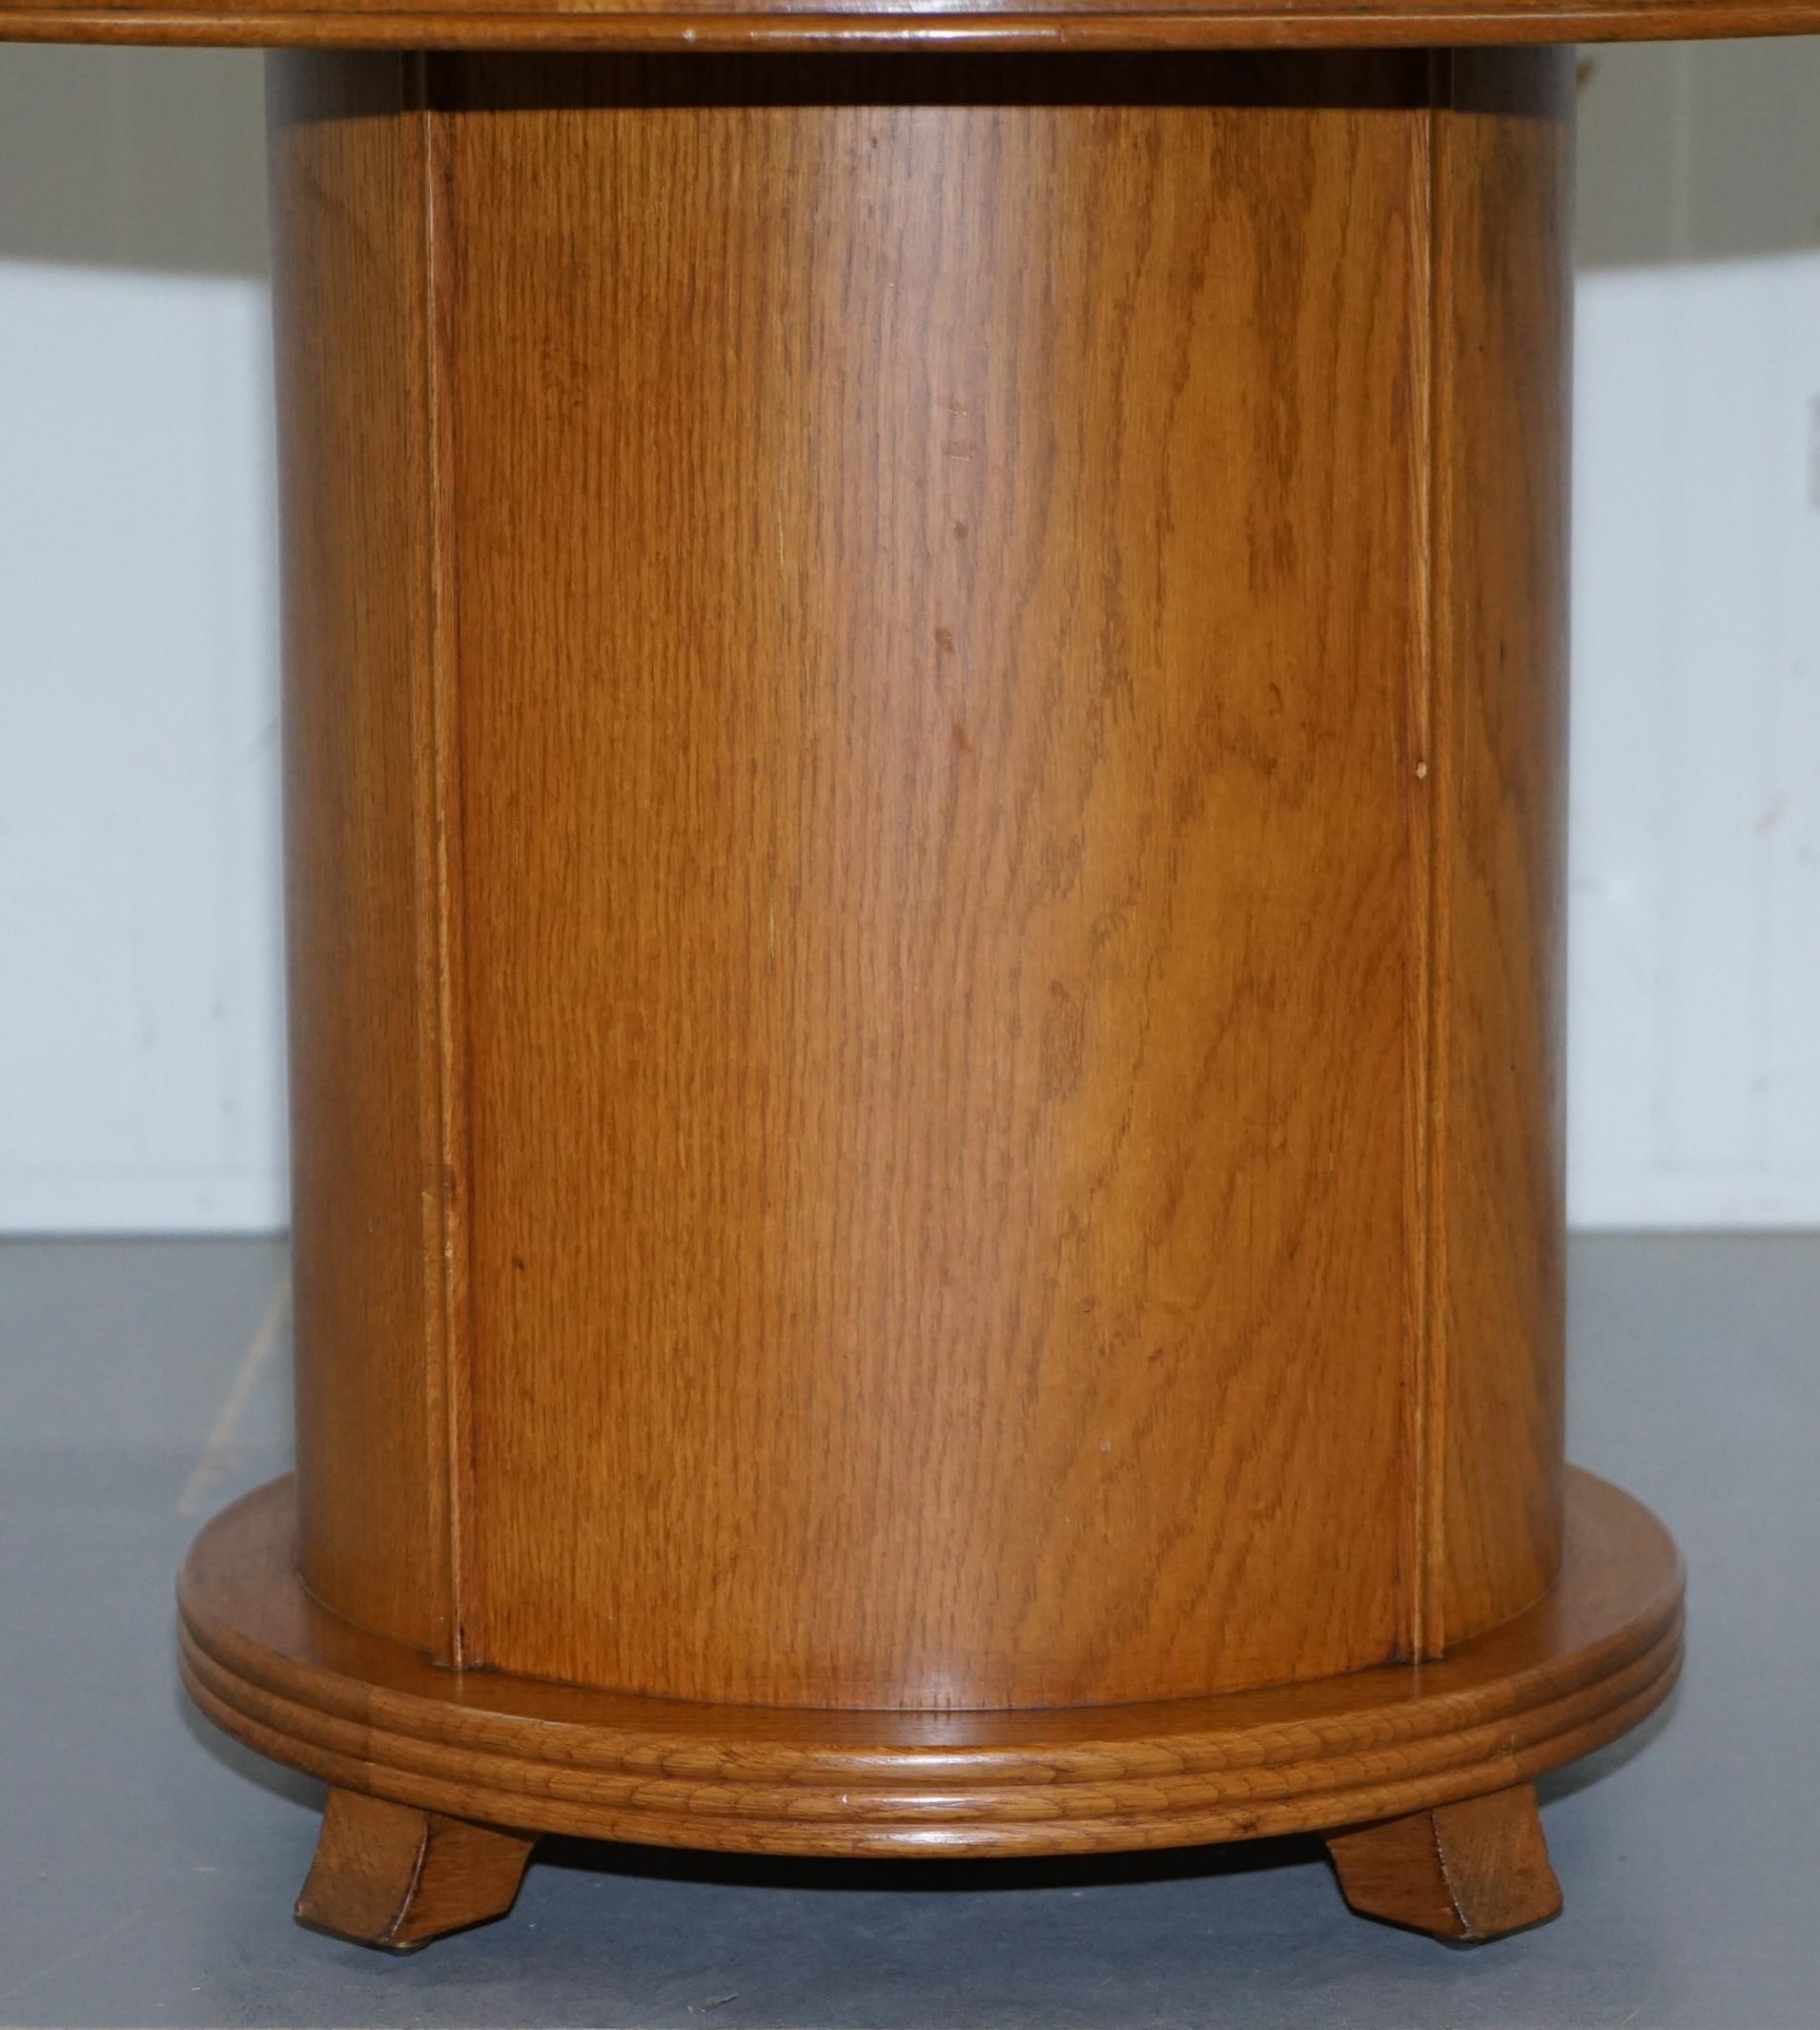 English Rare 1930s Walnut Cocktail Table Cabinet with Rising Drinks Decanter Holder